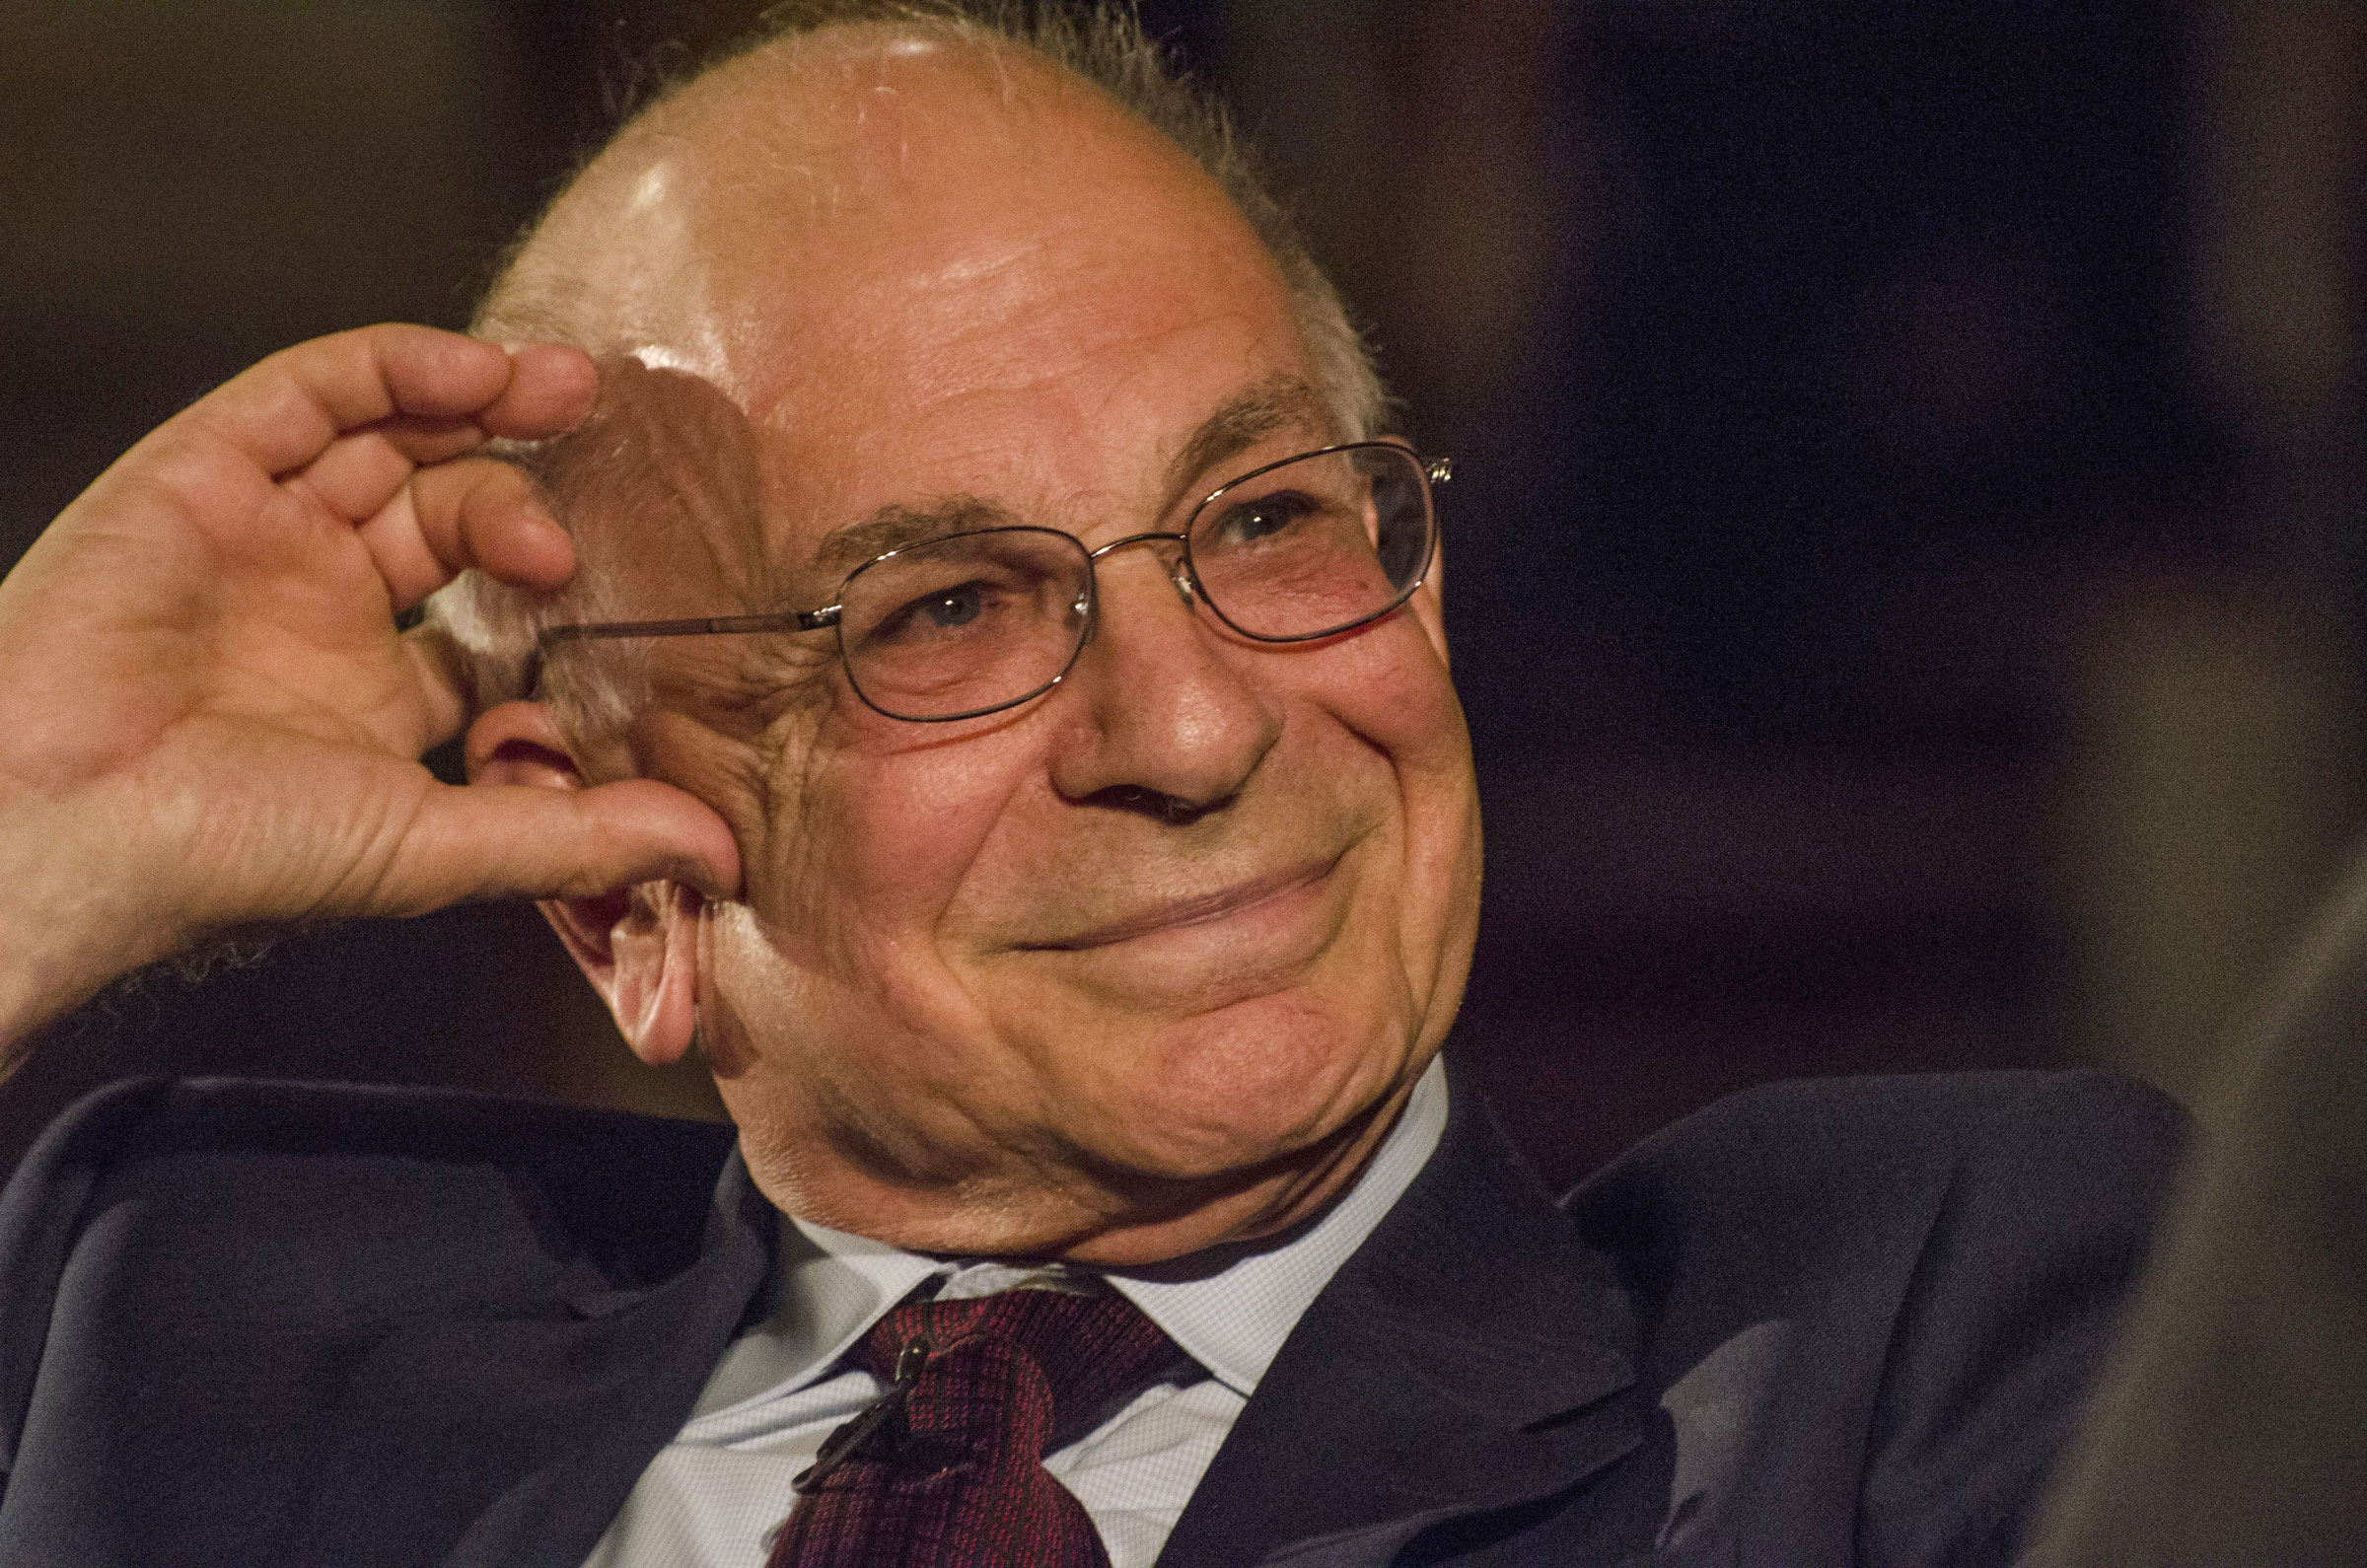 Daniel Kahneman in conversation at Methodist Central Hall in London, on March 18, 2014.